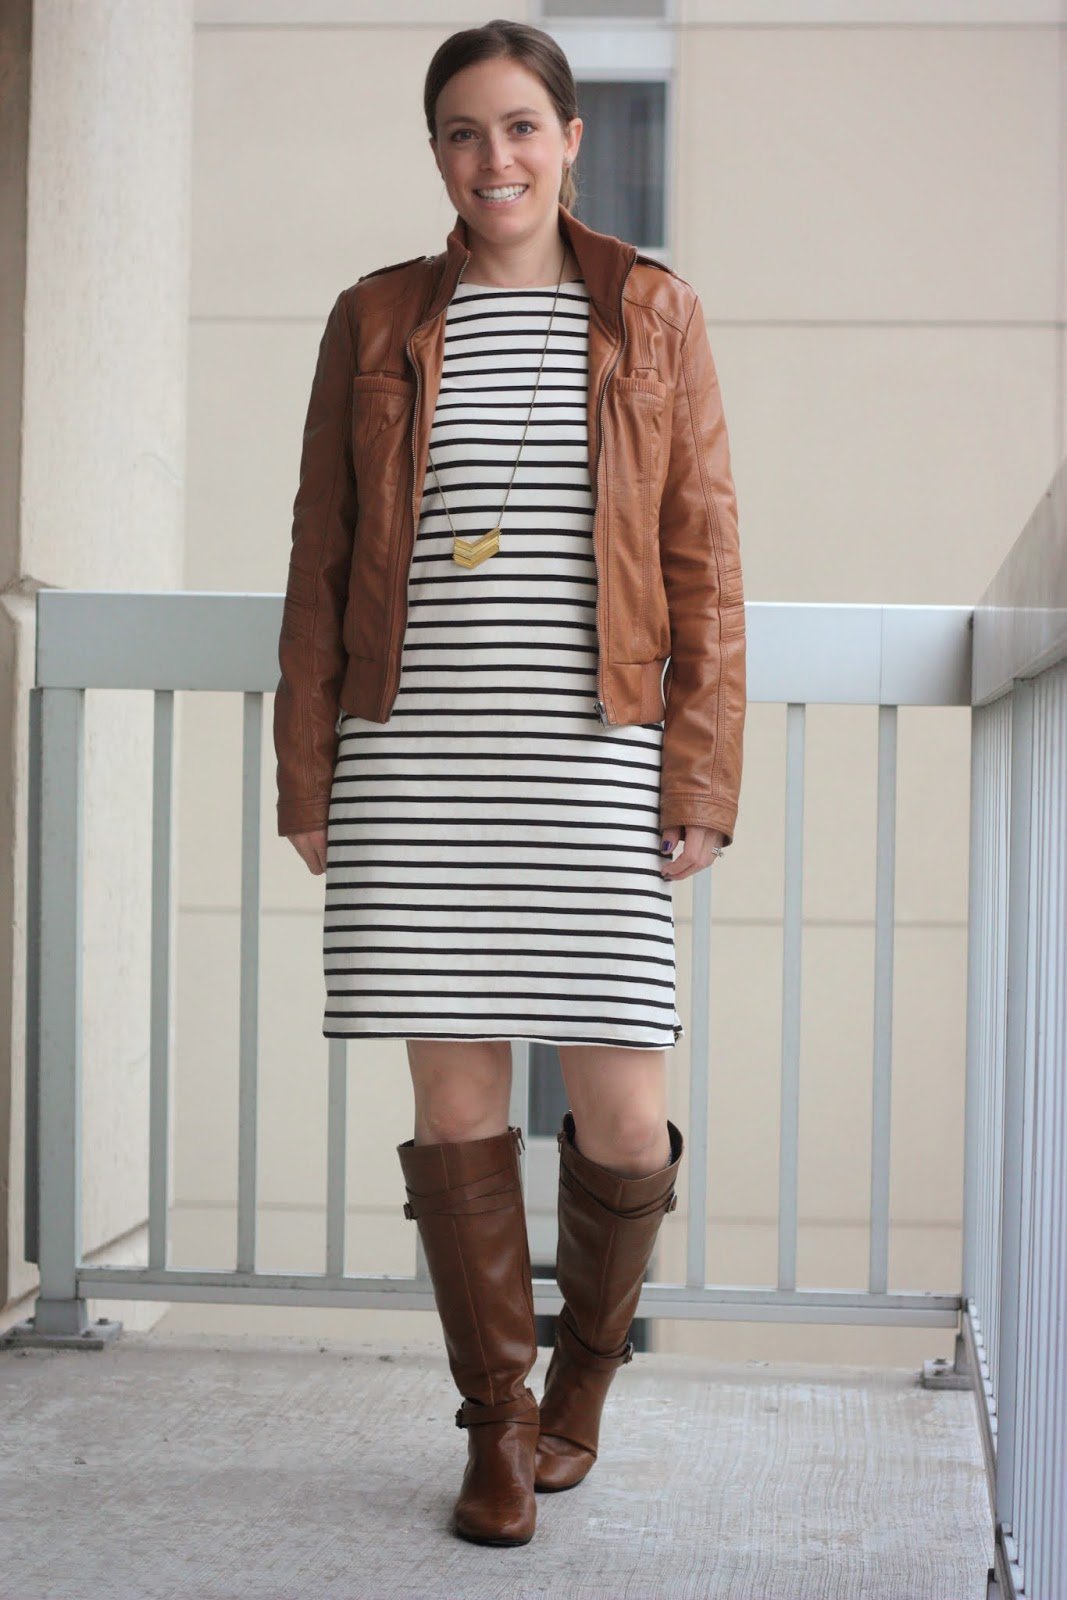 Black and white striped sheath dress, cognac leather jacket and boots for fall | business casual transitions to weekend | www.honestlymodern.com